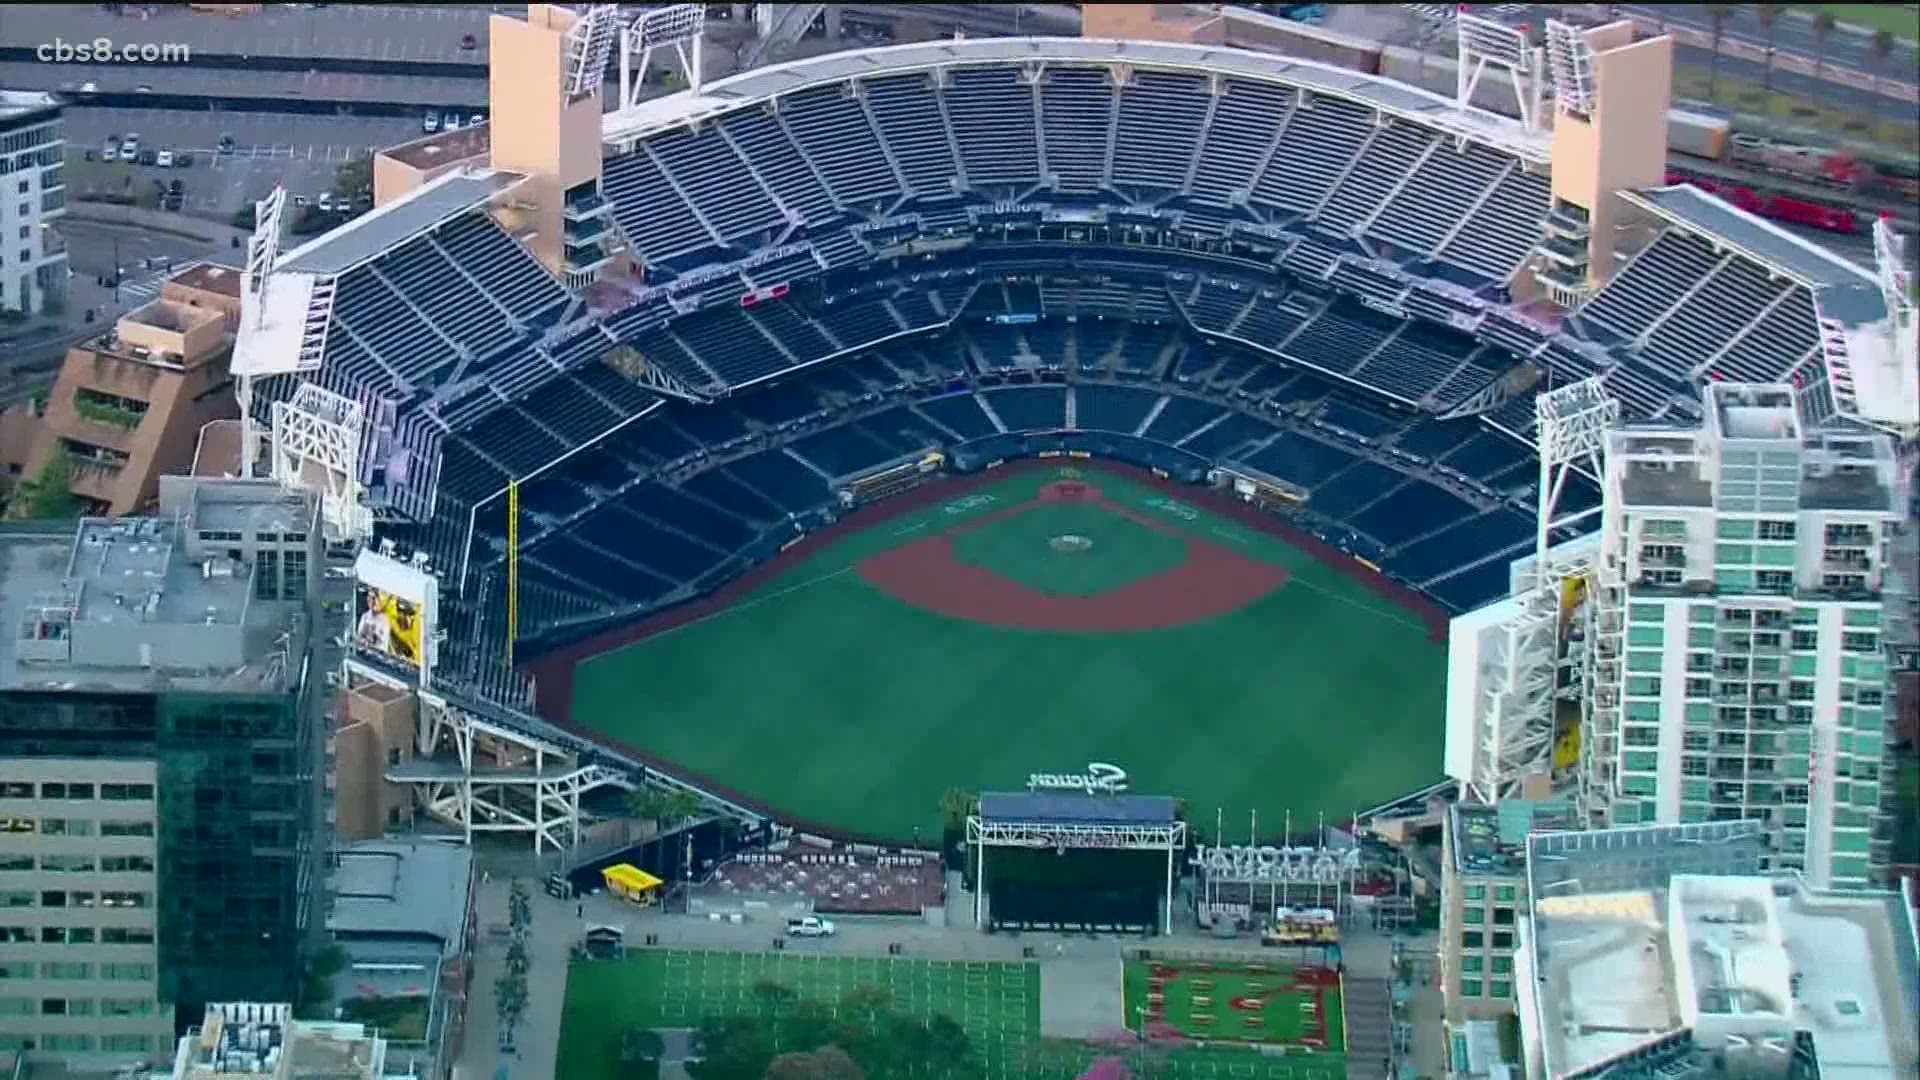 Full capacity, masks requirements lifted for fully vaccinated fans, added promotions at Petco Park and bars are prepping as much as they can for the crowds.